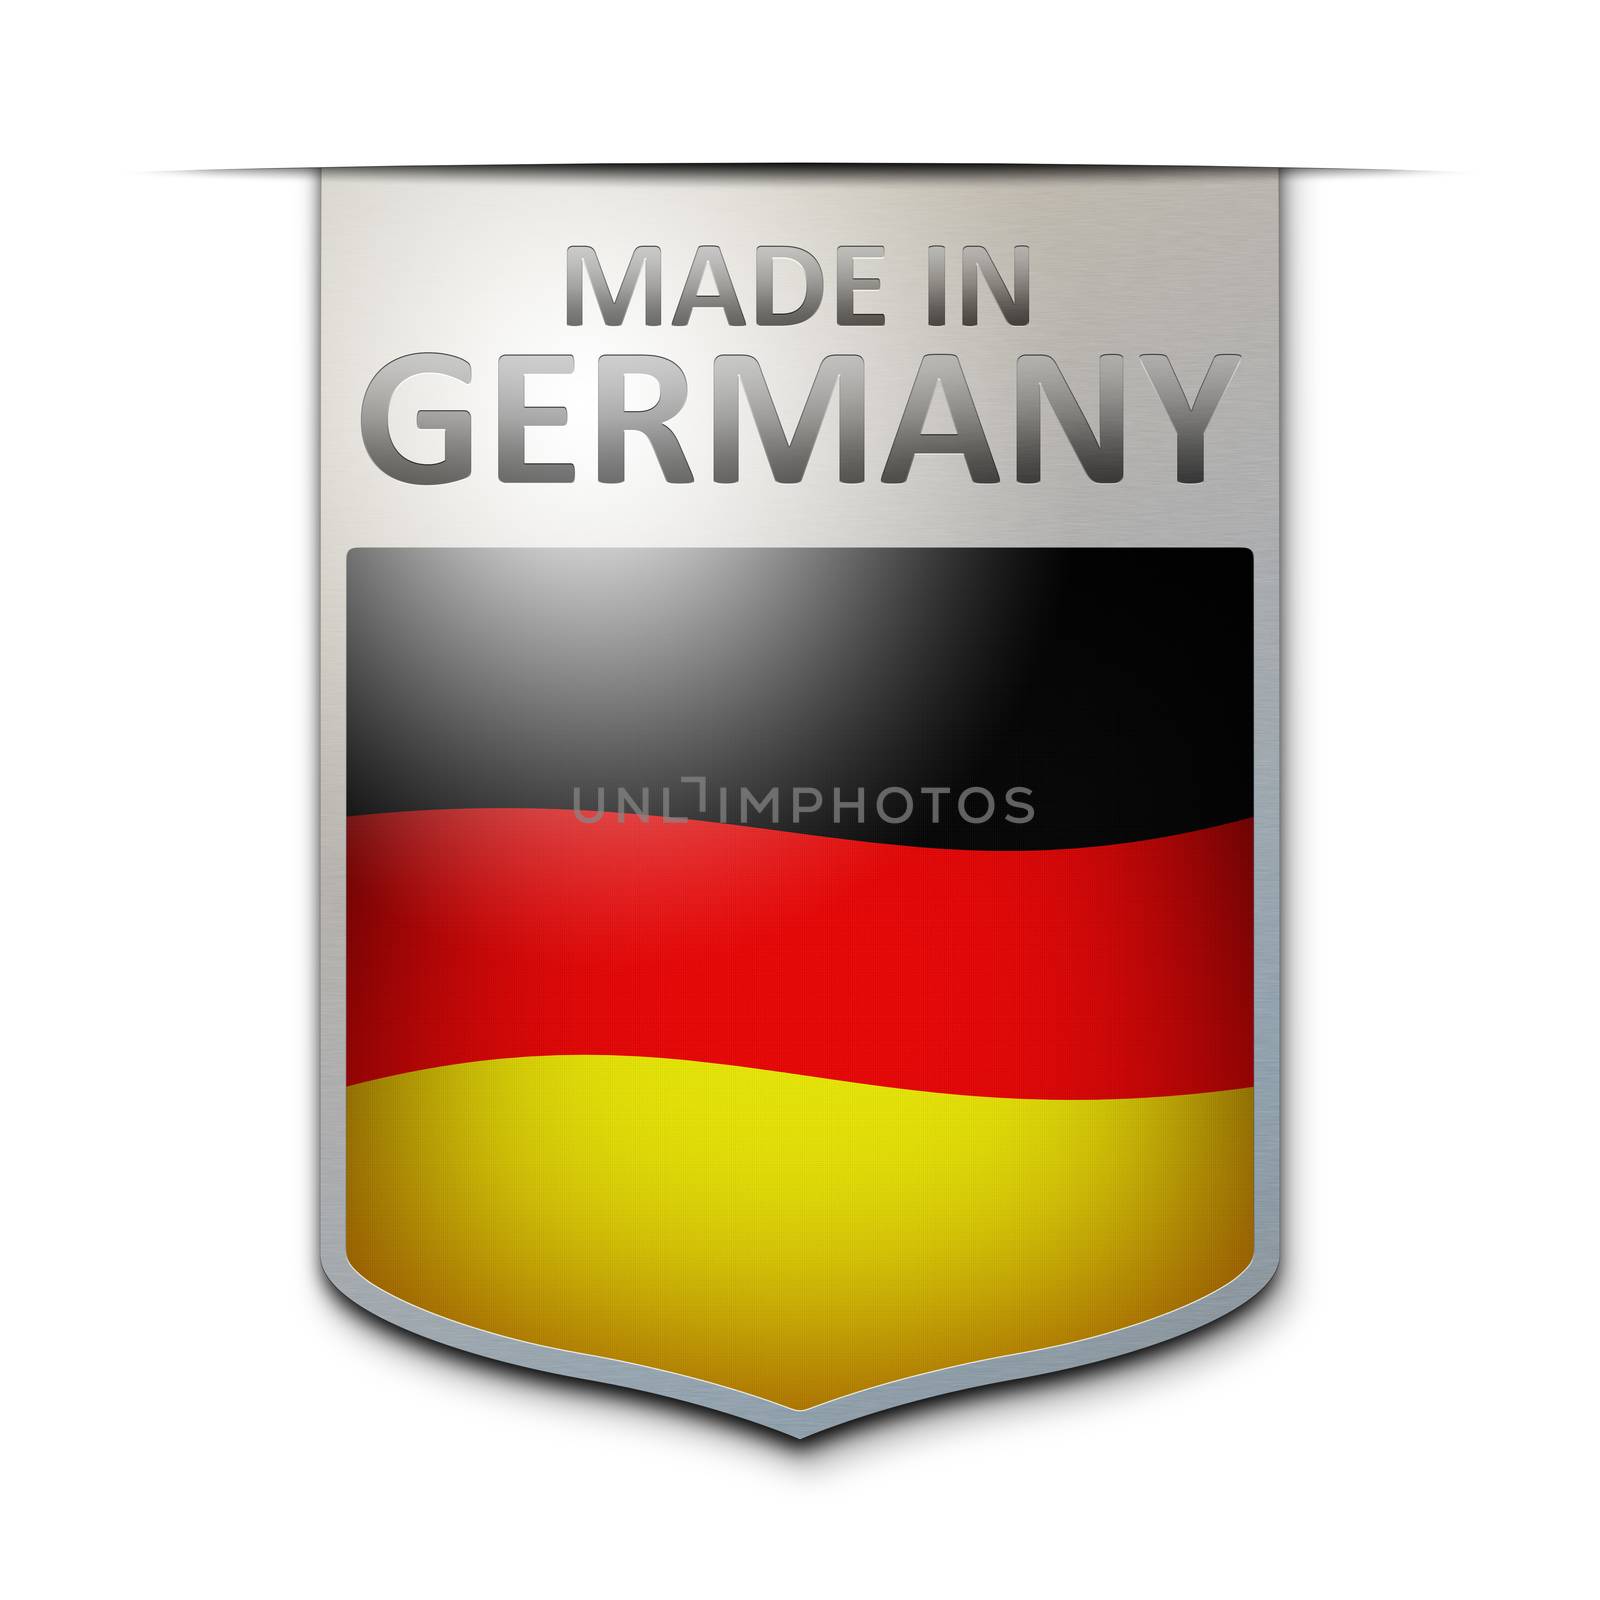 An image of a nice made in germany badge